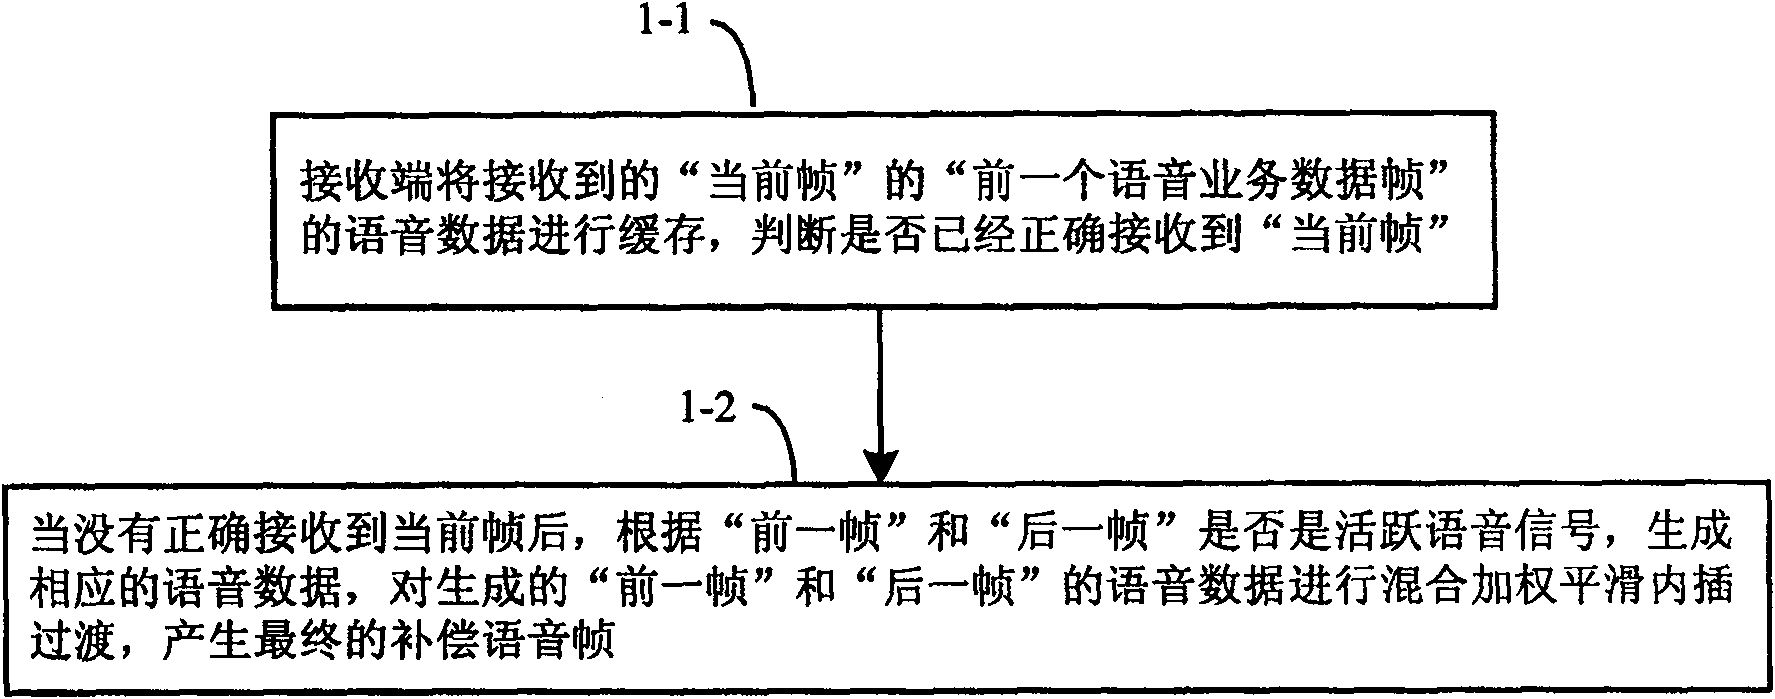 Method for compensating drop-out speech service data frame